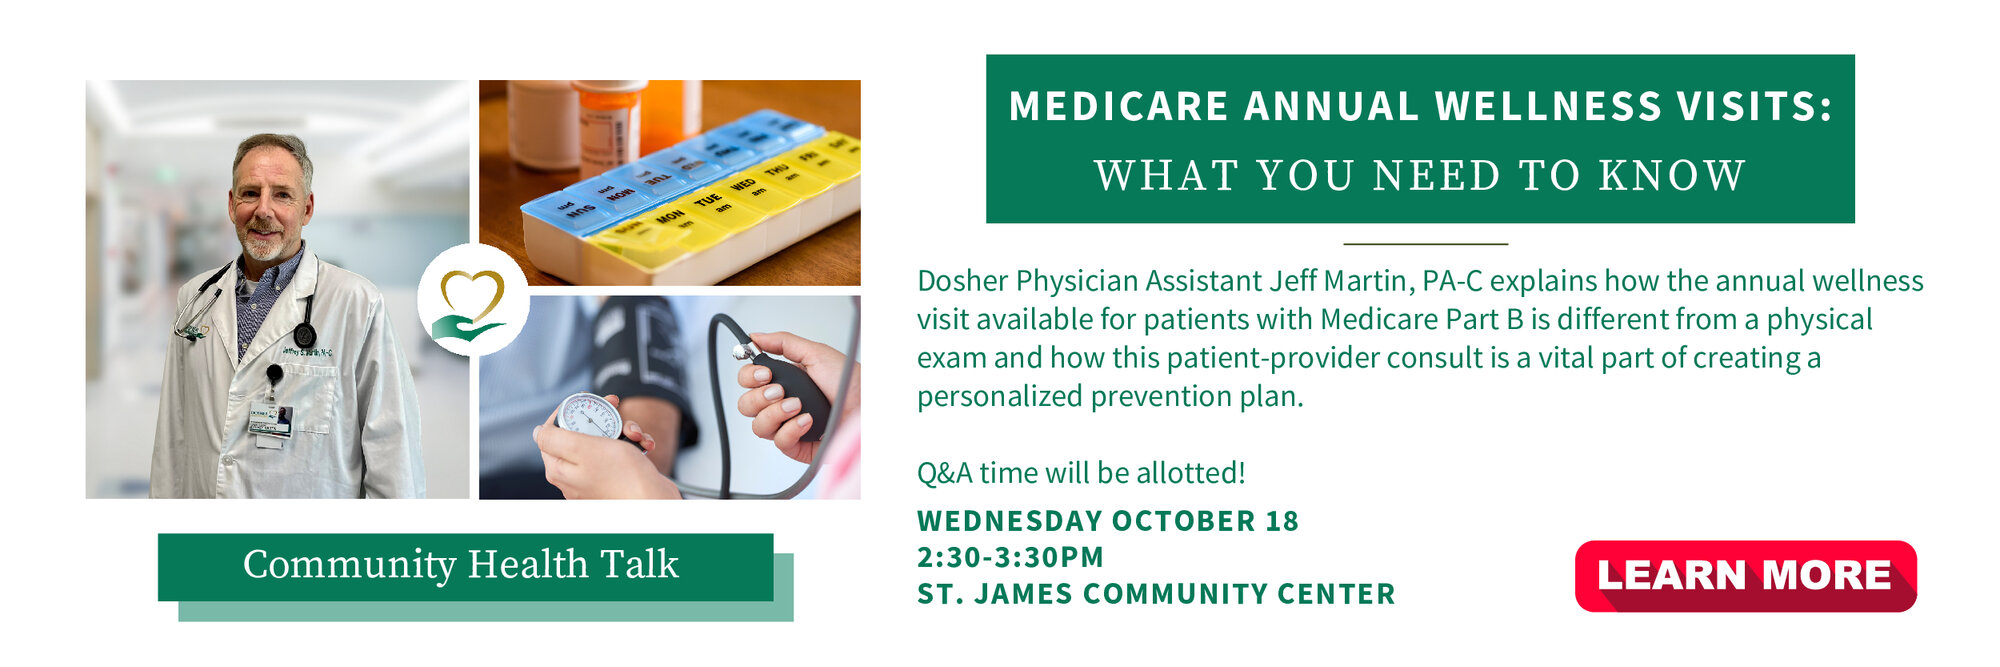 Community Health Talk - What You Need To Know About Medicare Wellness Visits.

Did You Know? 
Your annual wellness visit is vital to maintaining optimal health.  Take control of your appointment with valuable information from Jeff Martin, PA-C.
 
Wednesday, October 18, 2023, 2:30 pm - 3:30 pm
at the St. James Community Center
Reserve your spot today!